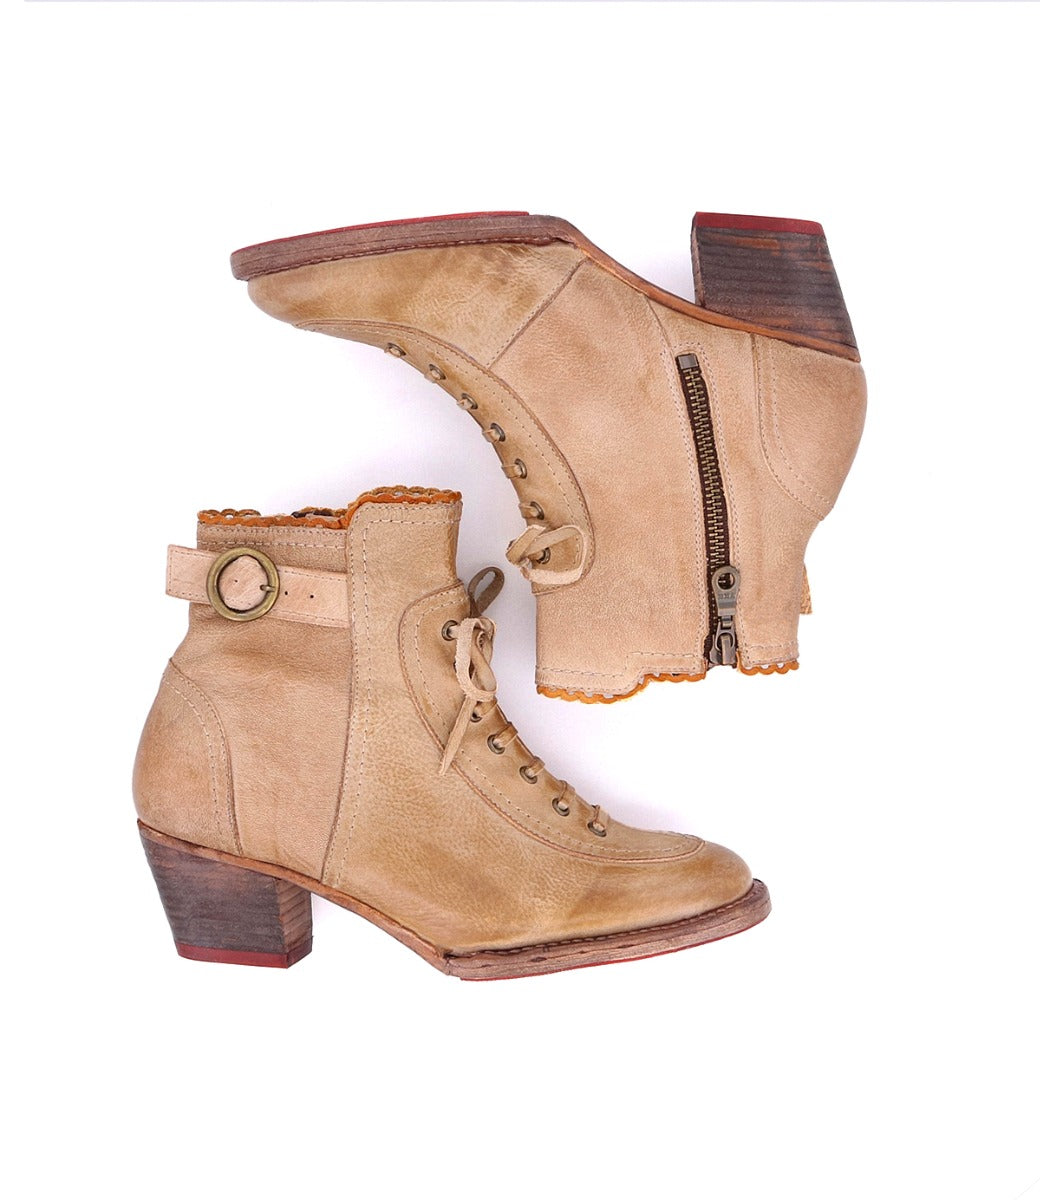 A pair of Oak Tree Farms tan leather heeled boots on a white background.